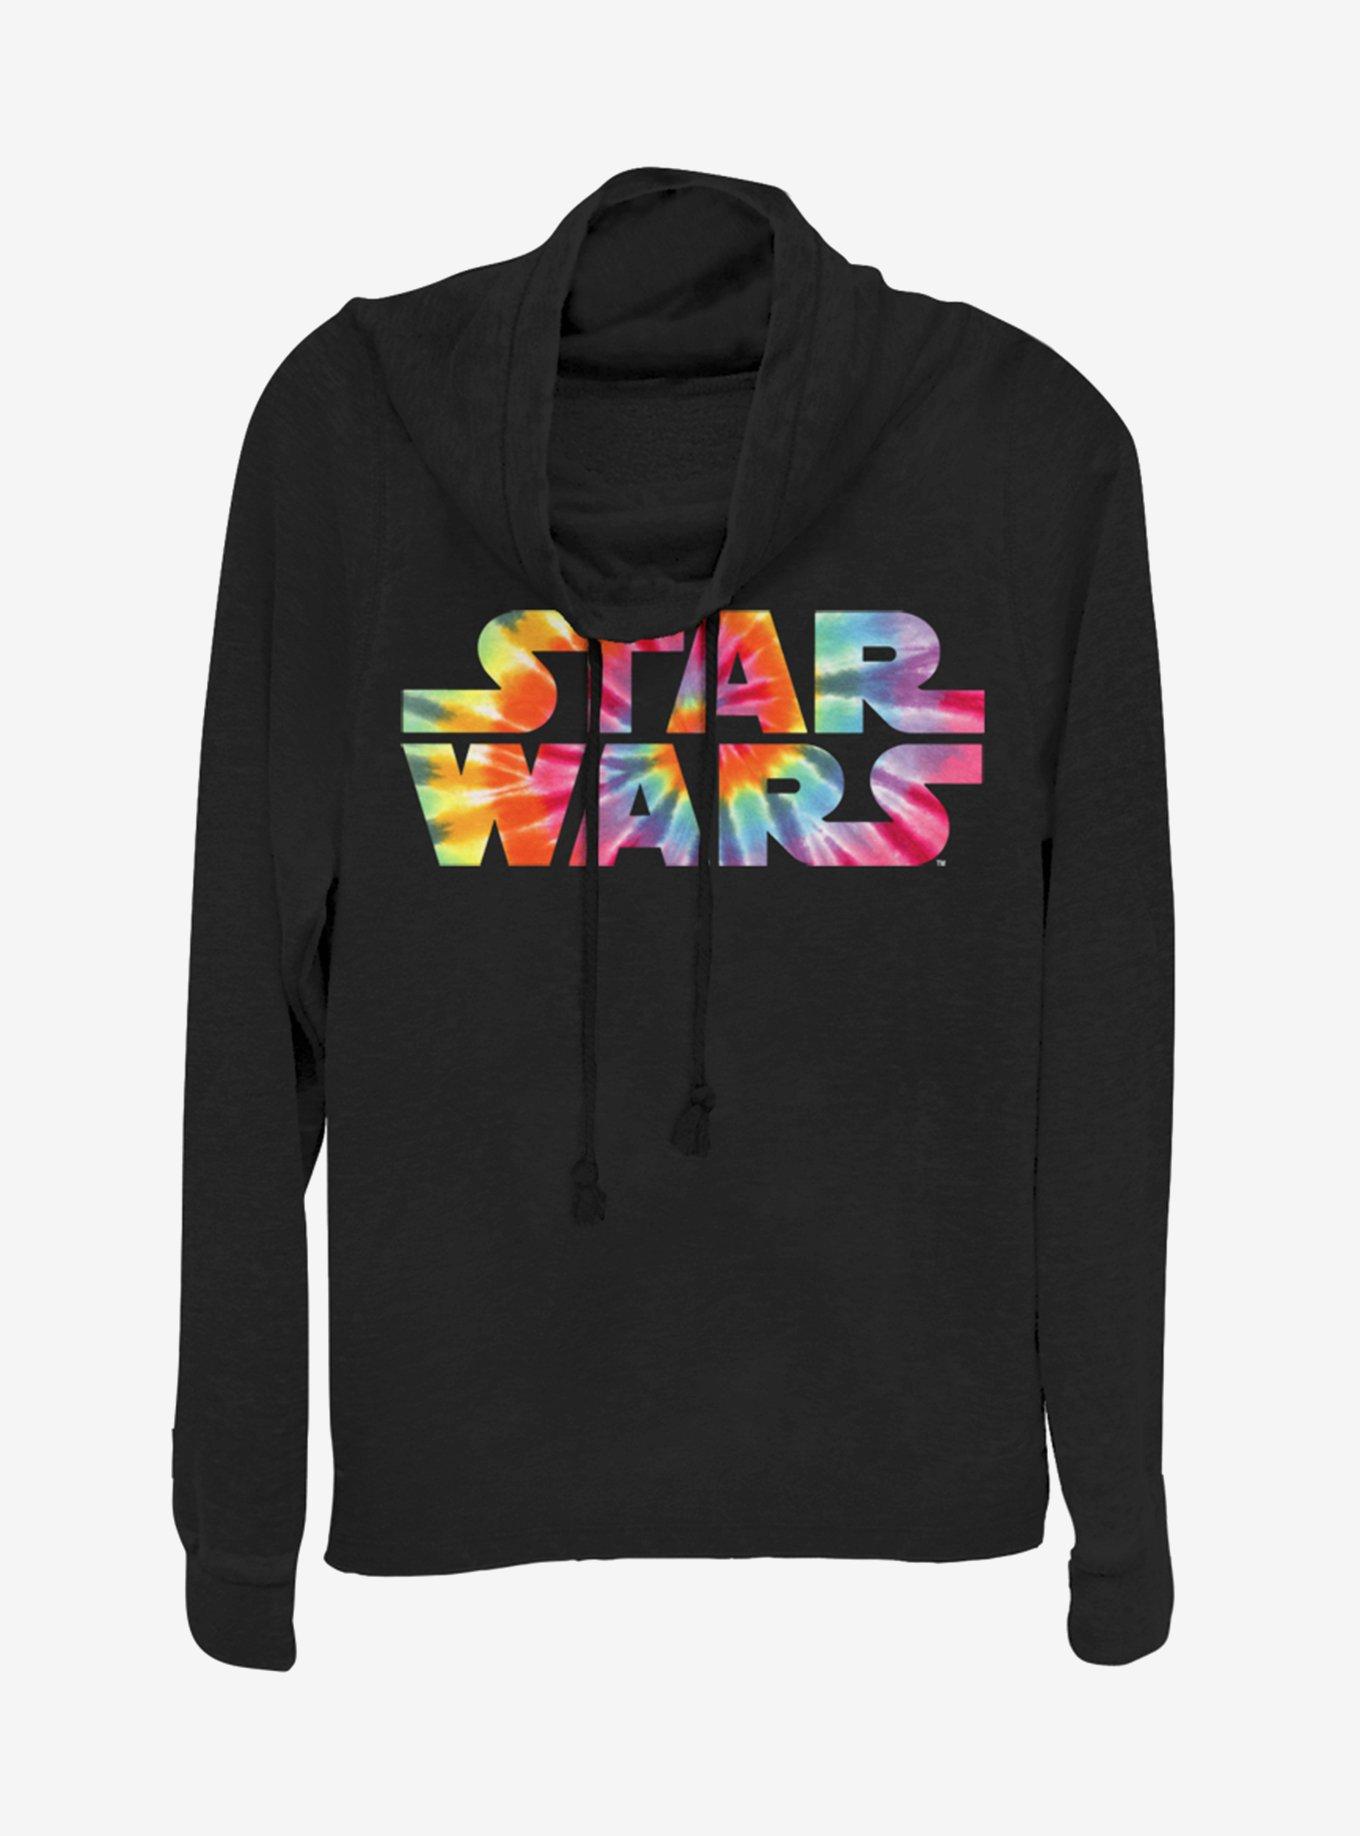 Star Wars To Dye For Cowlneck Long-Sleeve Girls Top - BLACK | Hot Topic